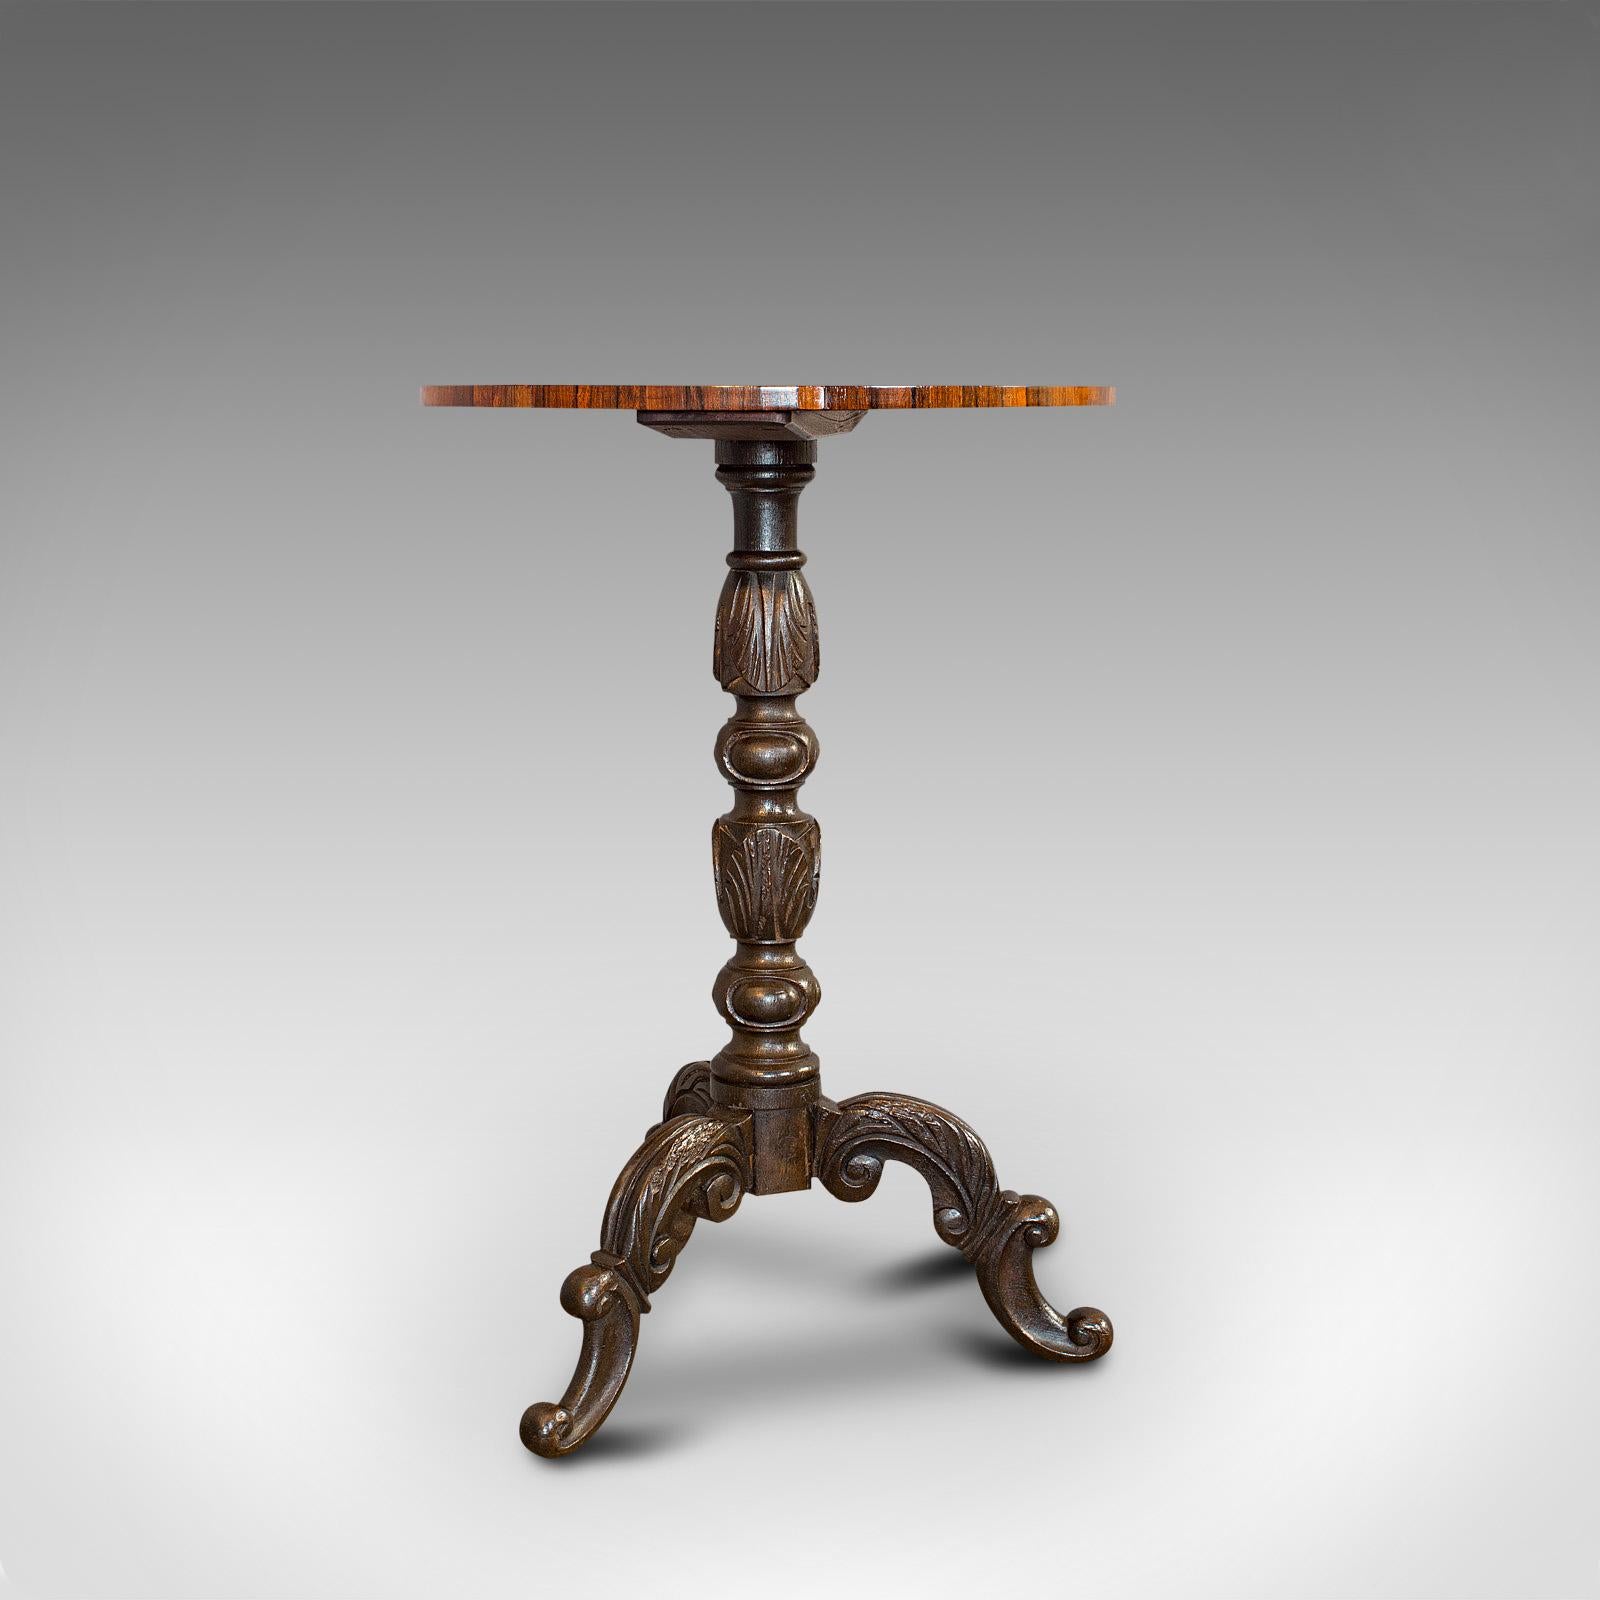 This is an antique games table. An English, Rosewood over mahogany chess board, dating to the Victorian period, circa 1880.

Distinguished, elegant chess table
Displays a desirable aged patina
Circular rosewood top offers fine grain interest and